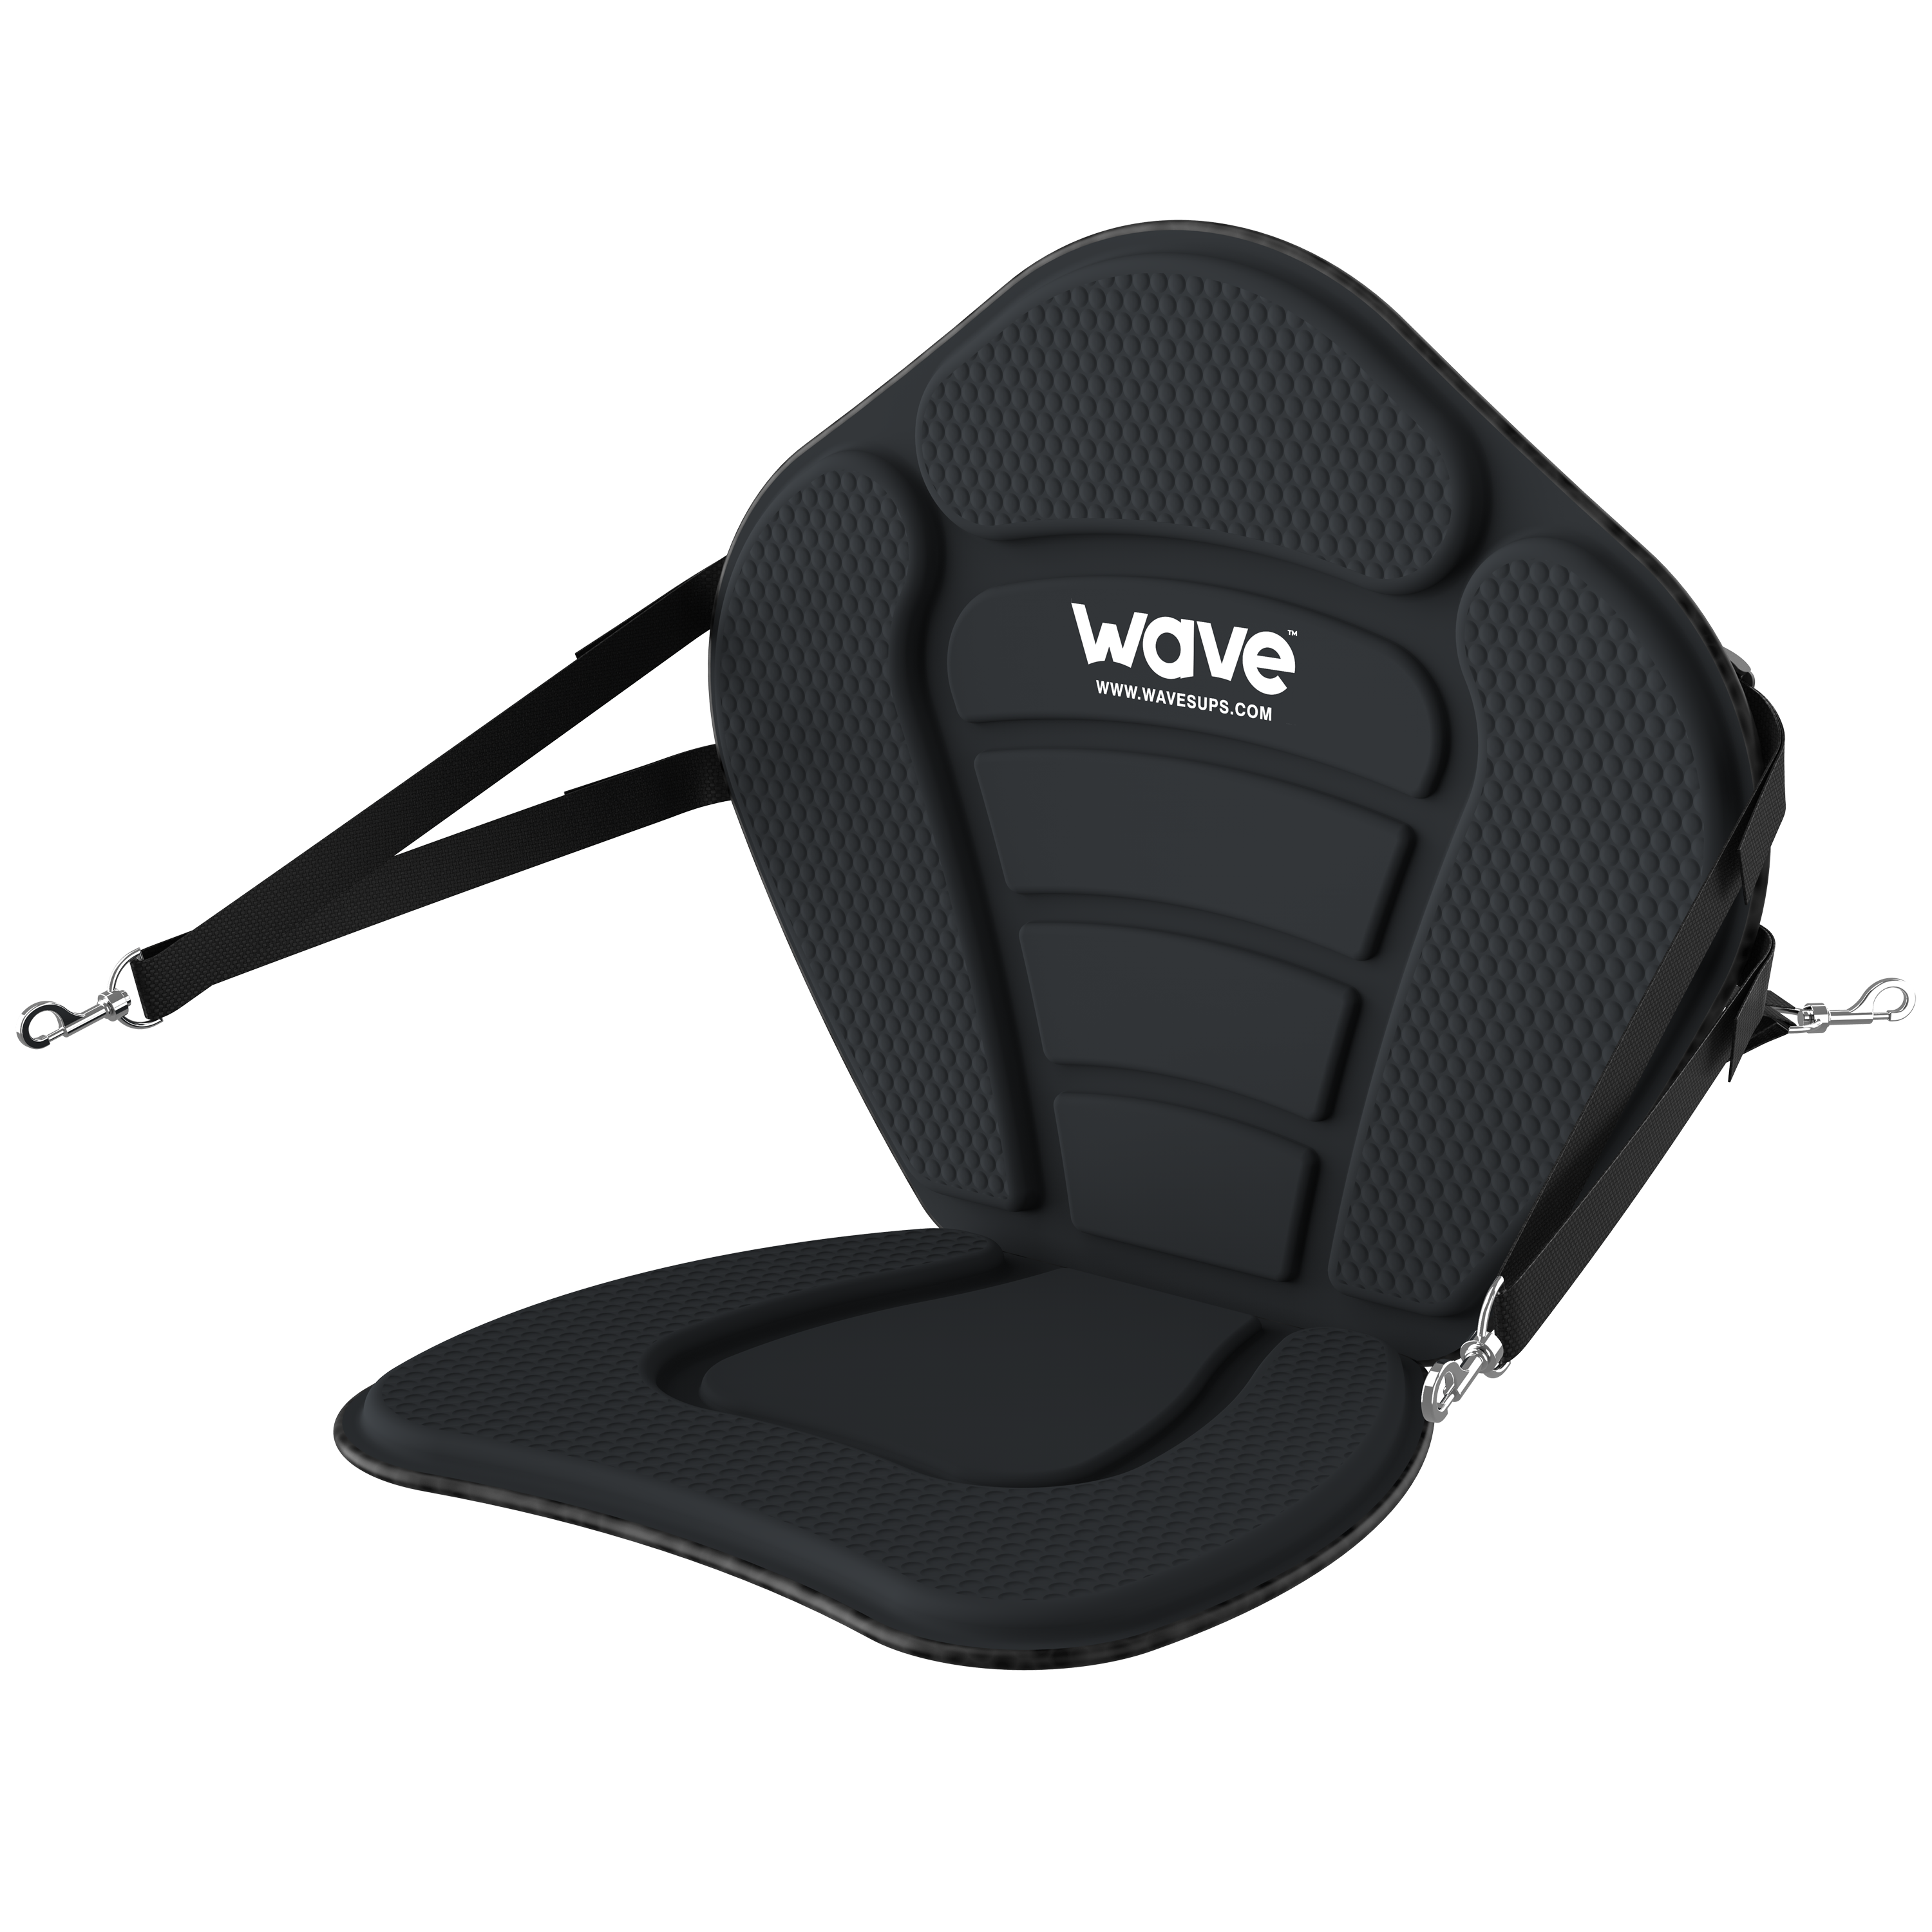 Wave Kayak Seat | Kayak Conversion Seat for Pro, Woody and Wildcat - Wave Sups Inflatable Paddle boards